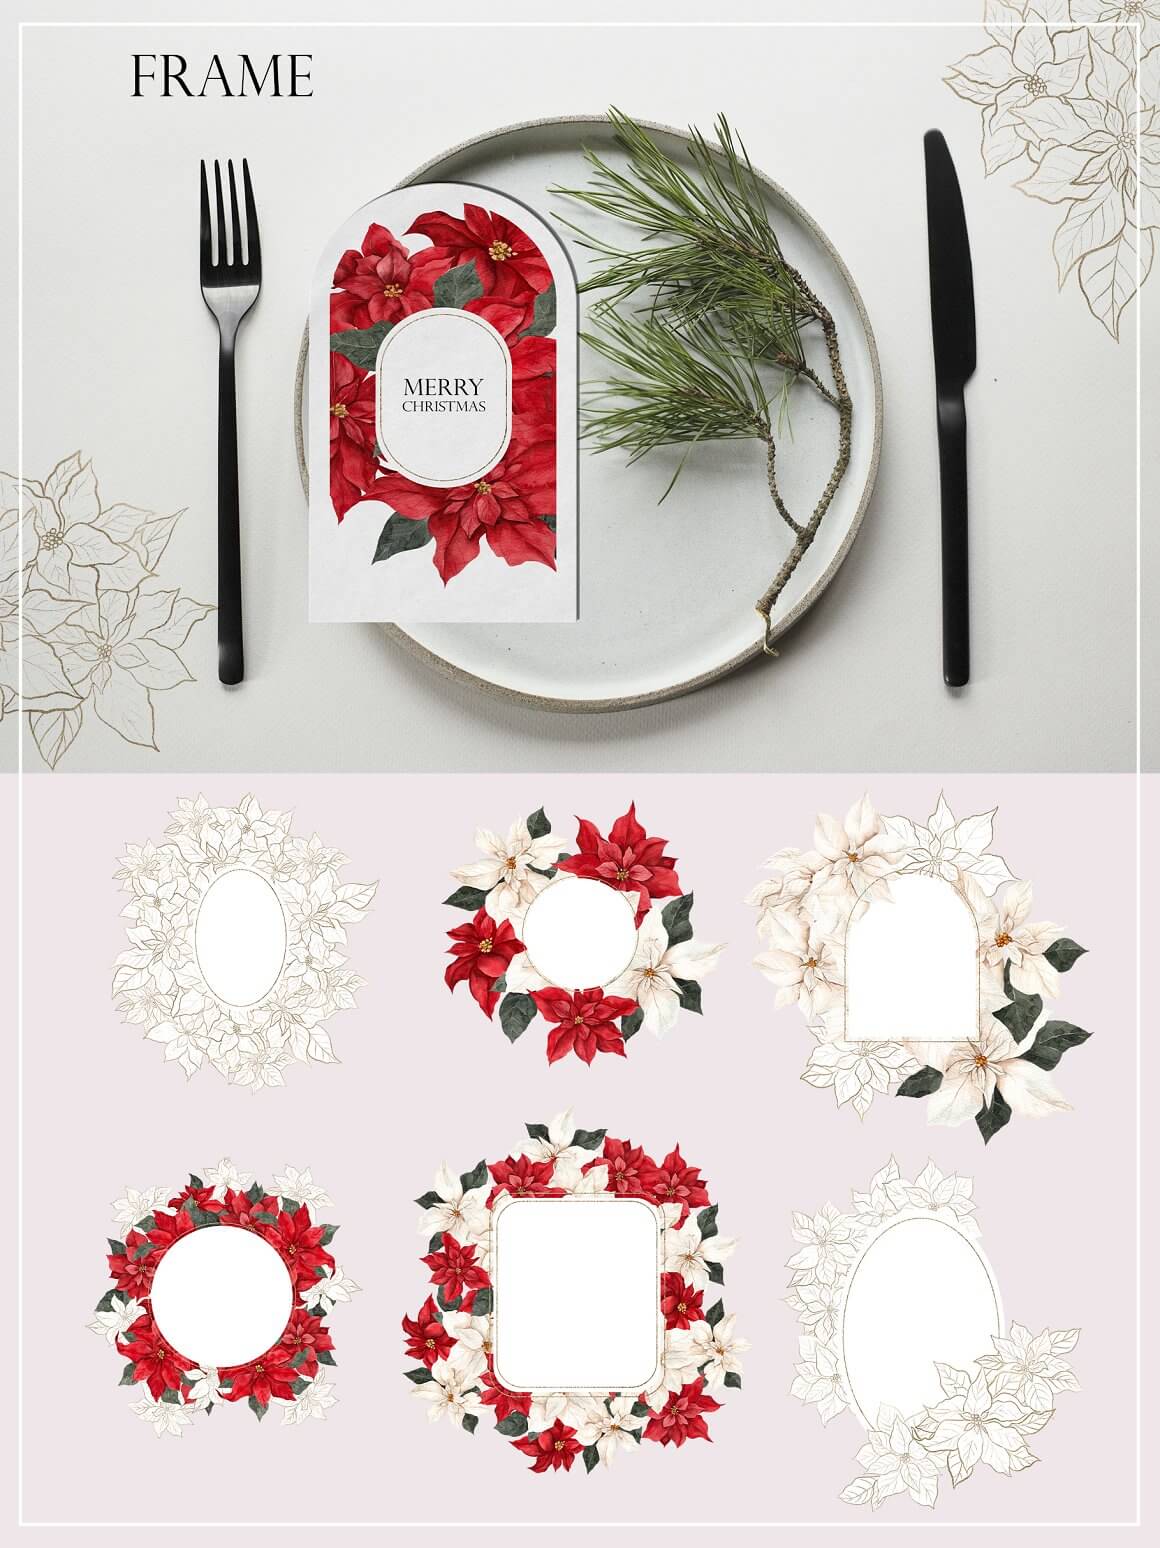 The Christmas table is decorated with a pine branch and a card with poinsettia flowers.